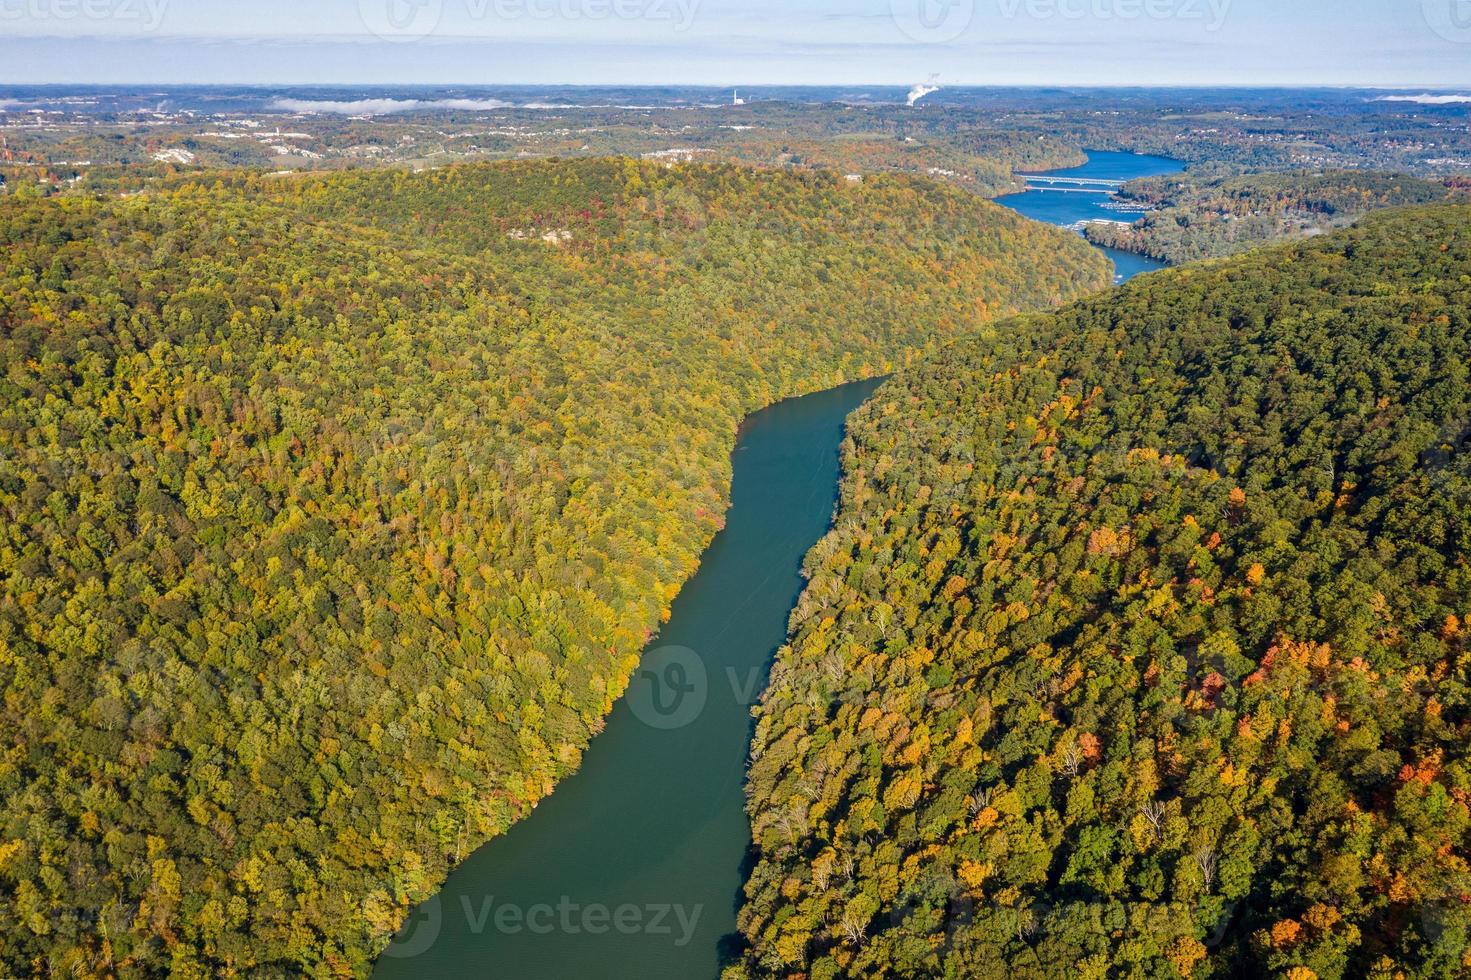 Narrow gorge of the Cheat River looking down towards the lake in West Virginia with fall colors photo